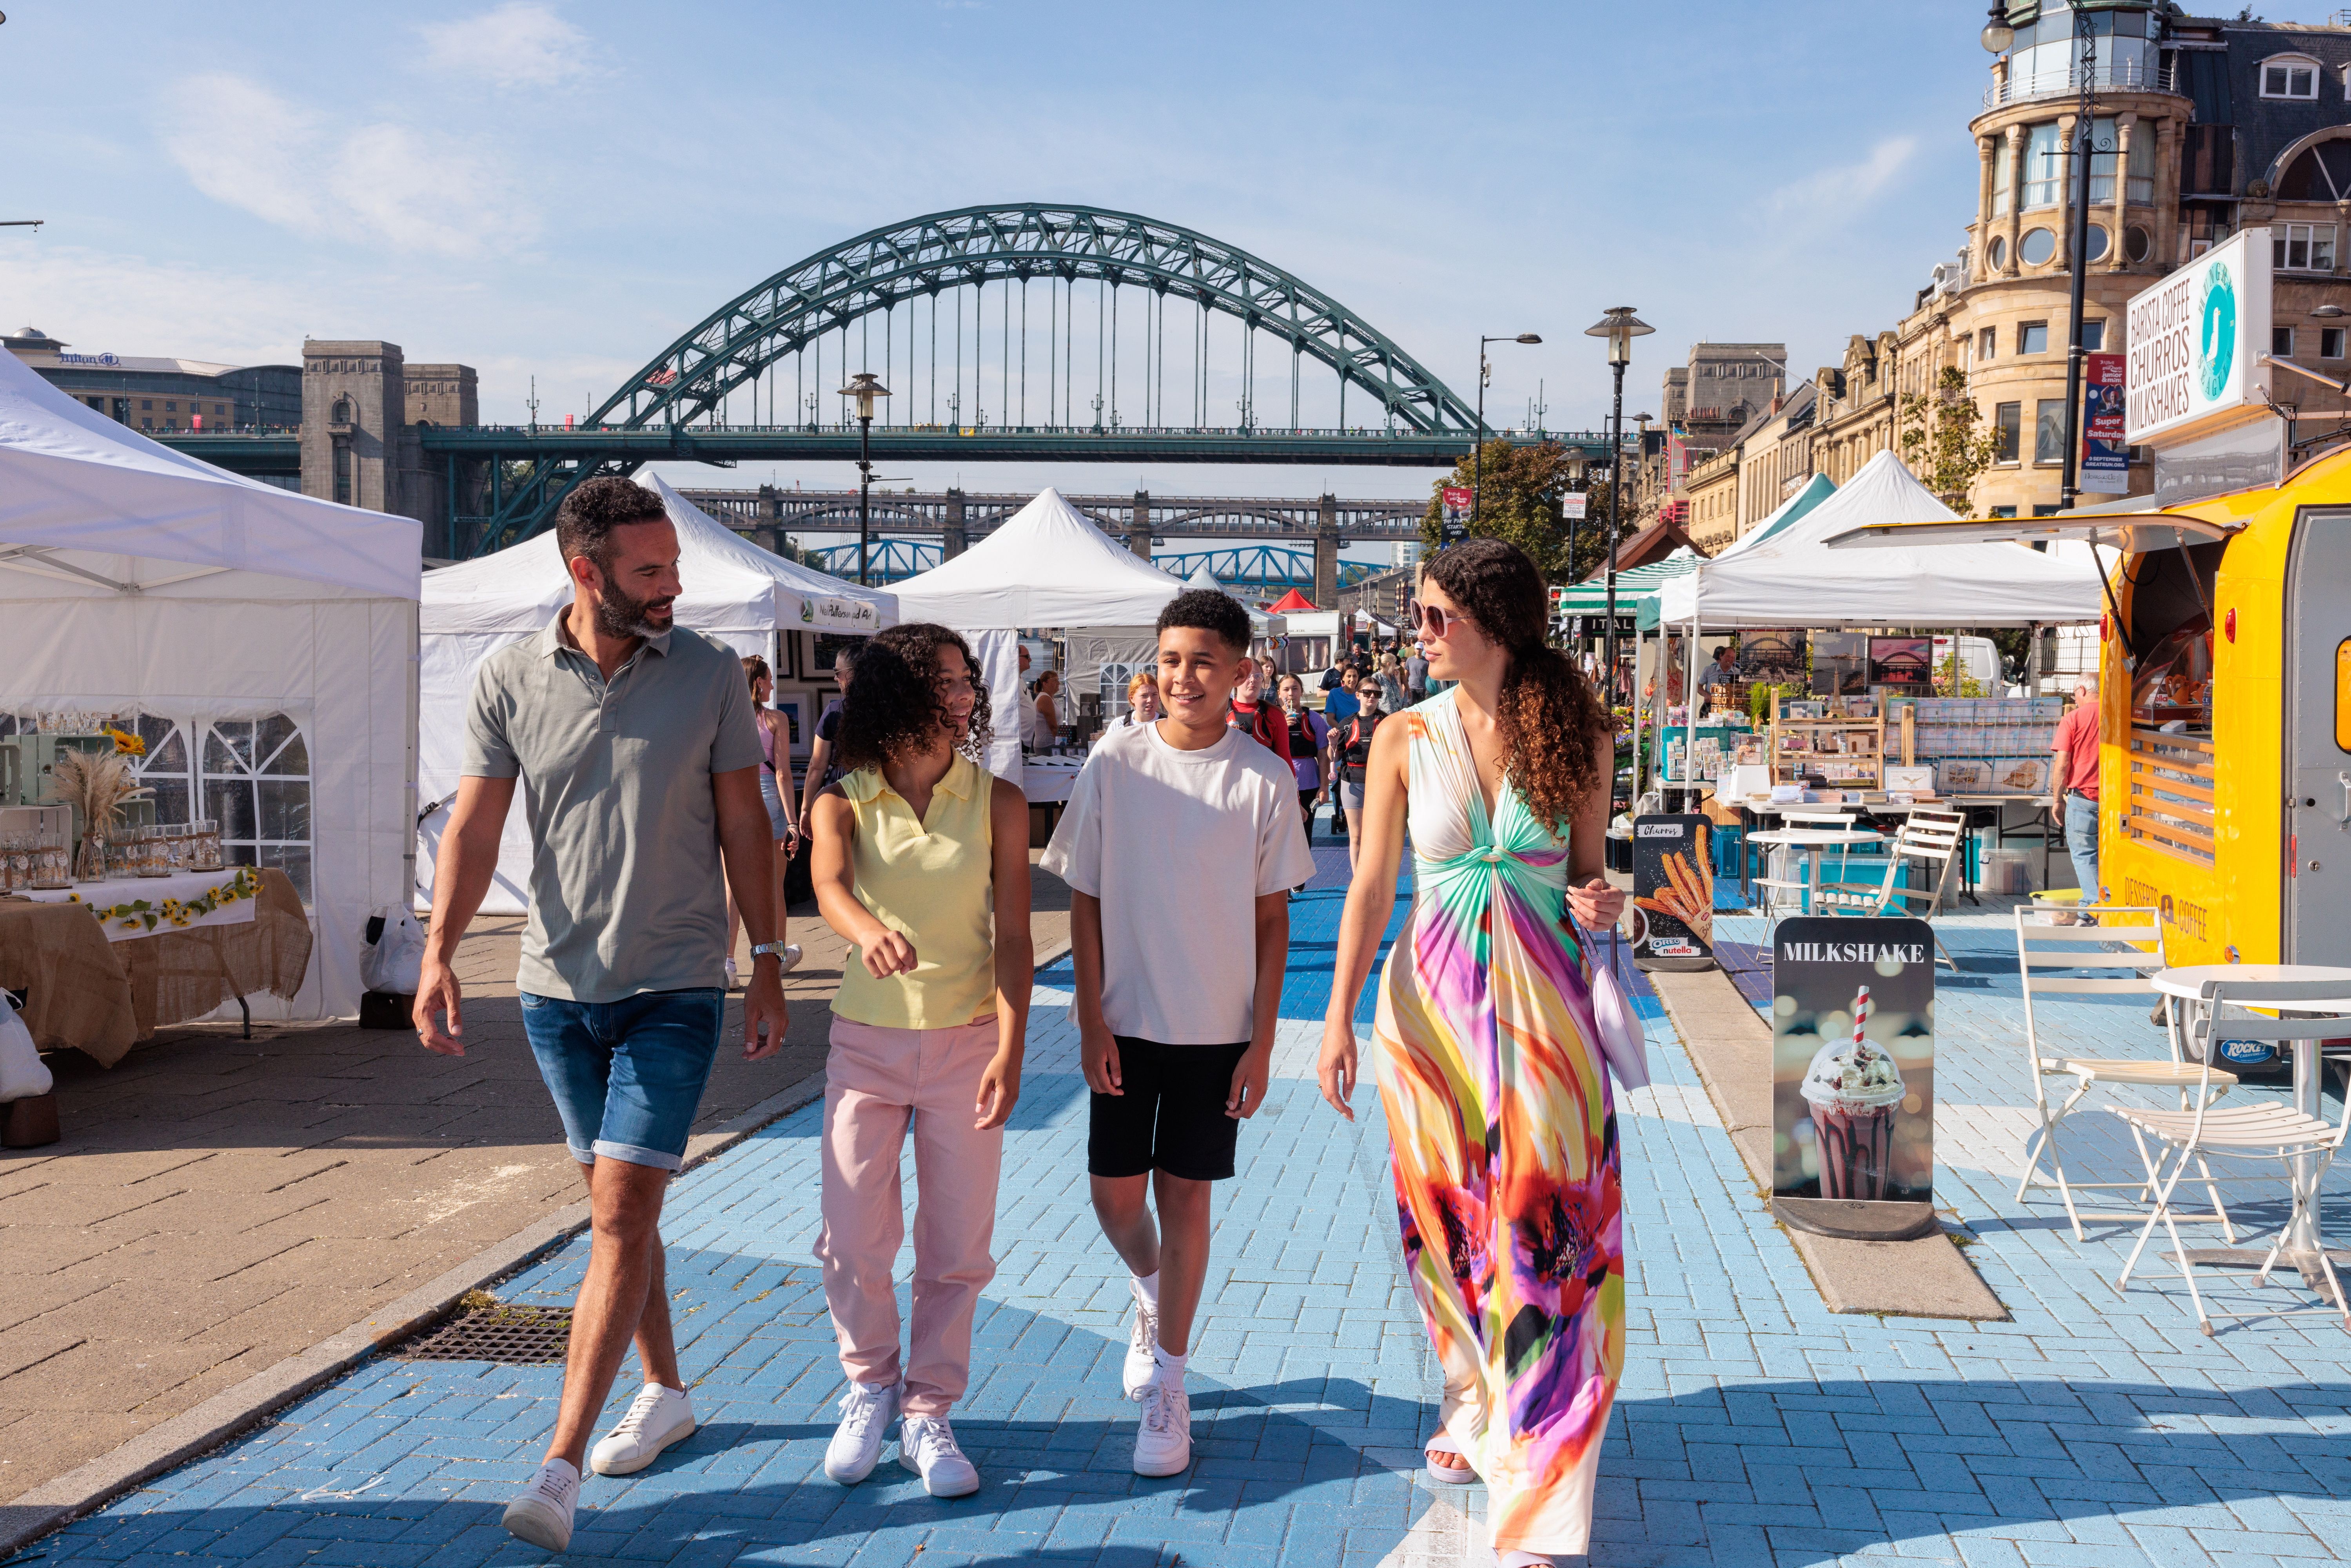 A family visit a Sunday market by the river Tyne in Newcastle upon Tyne